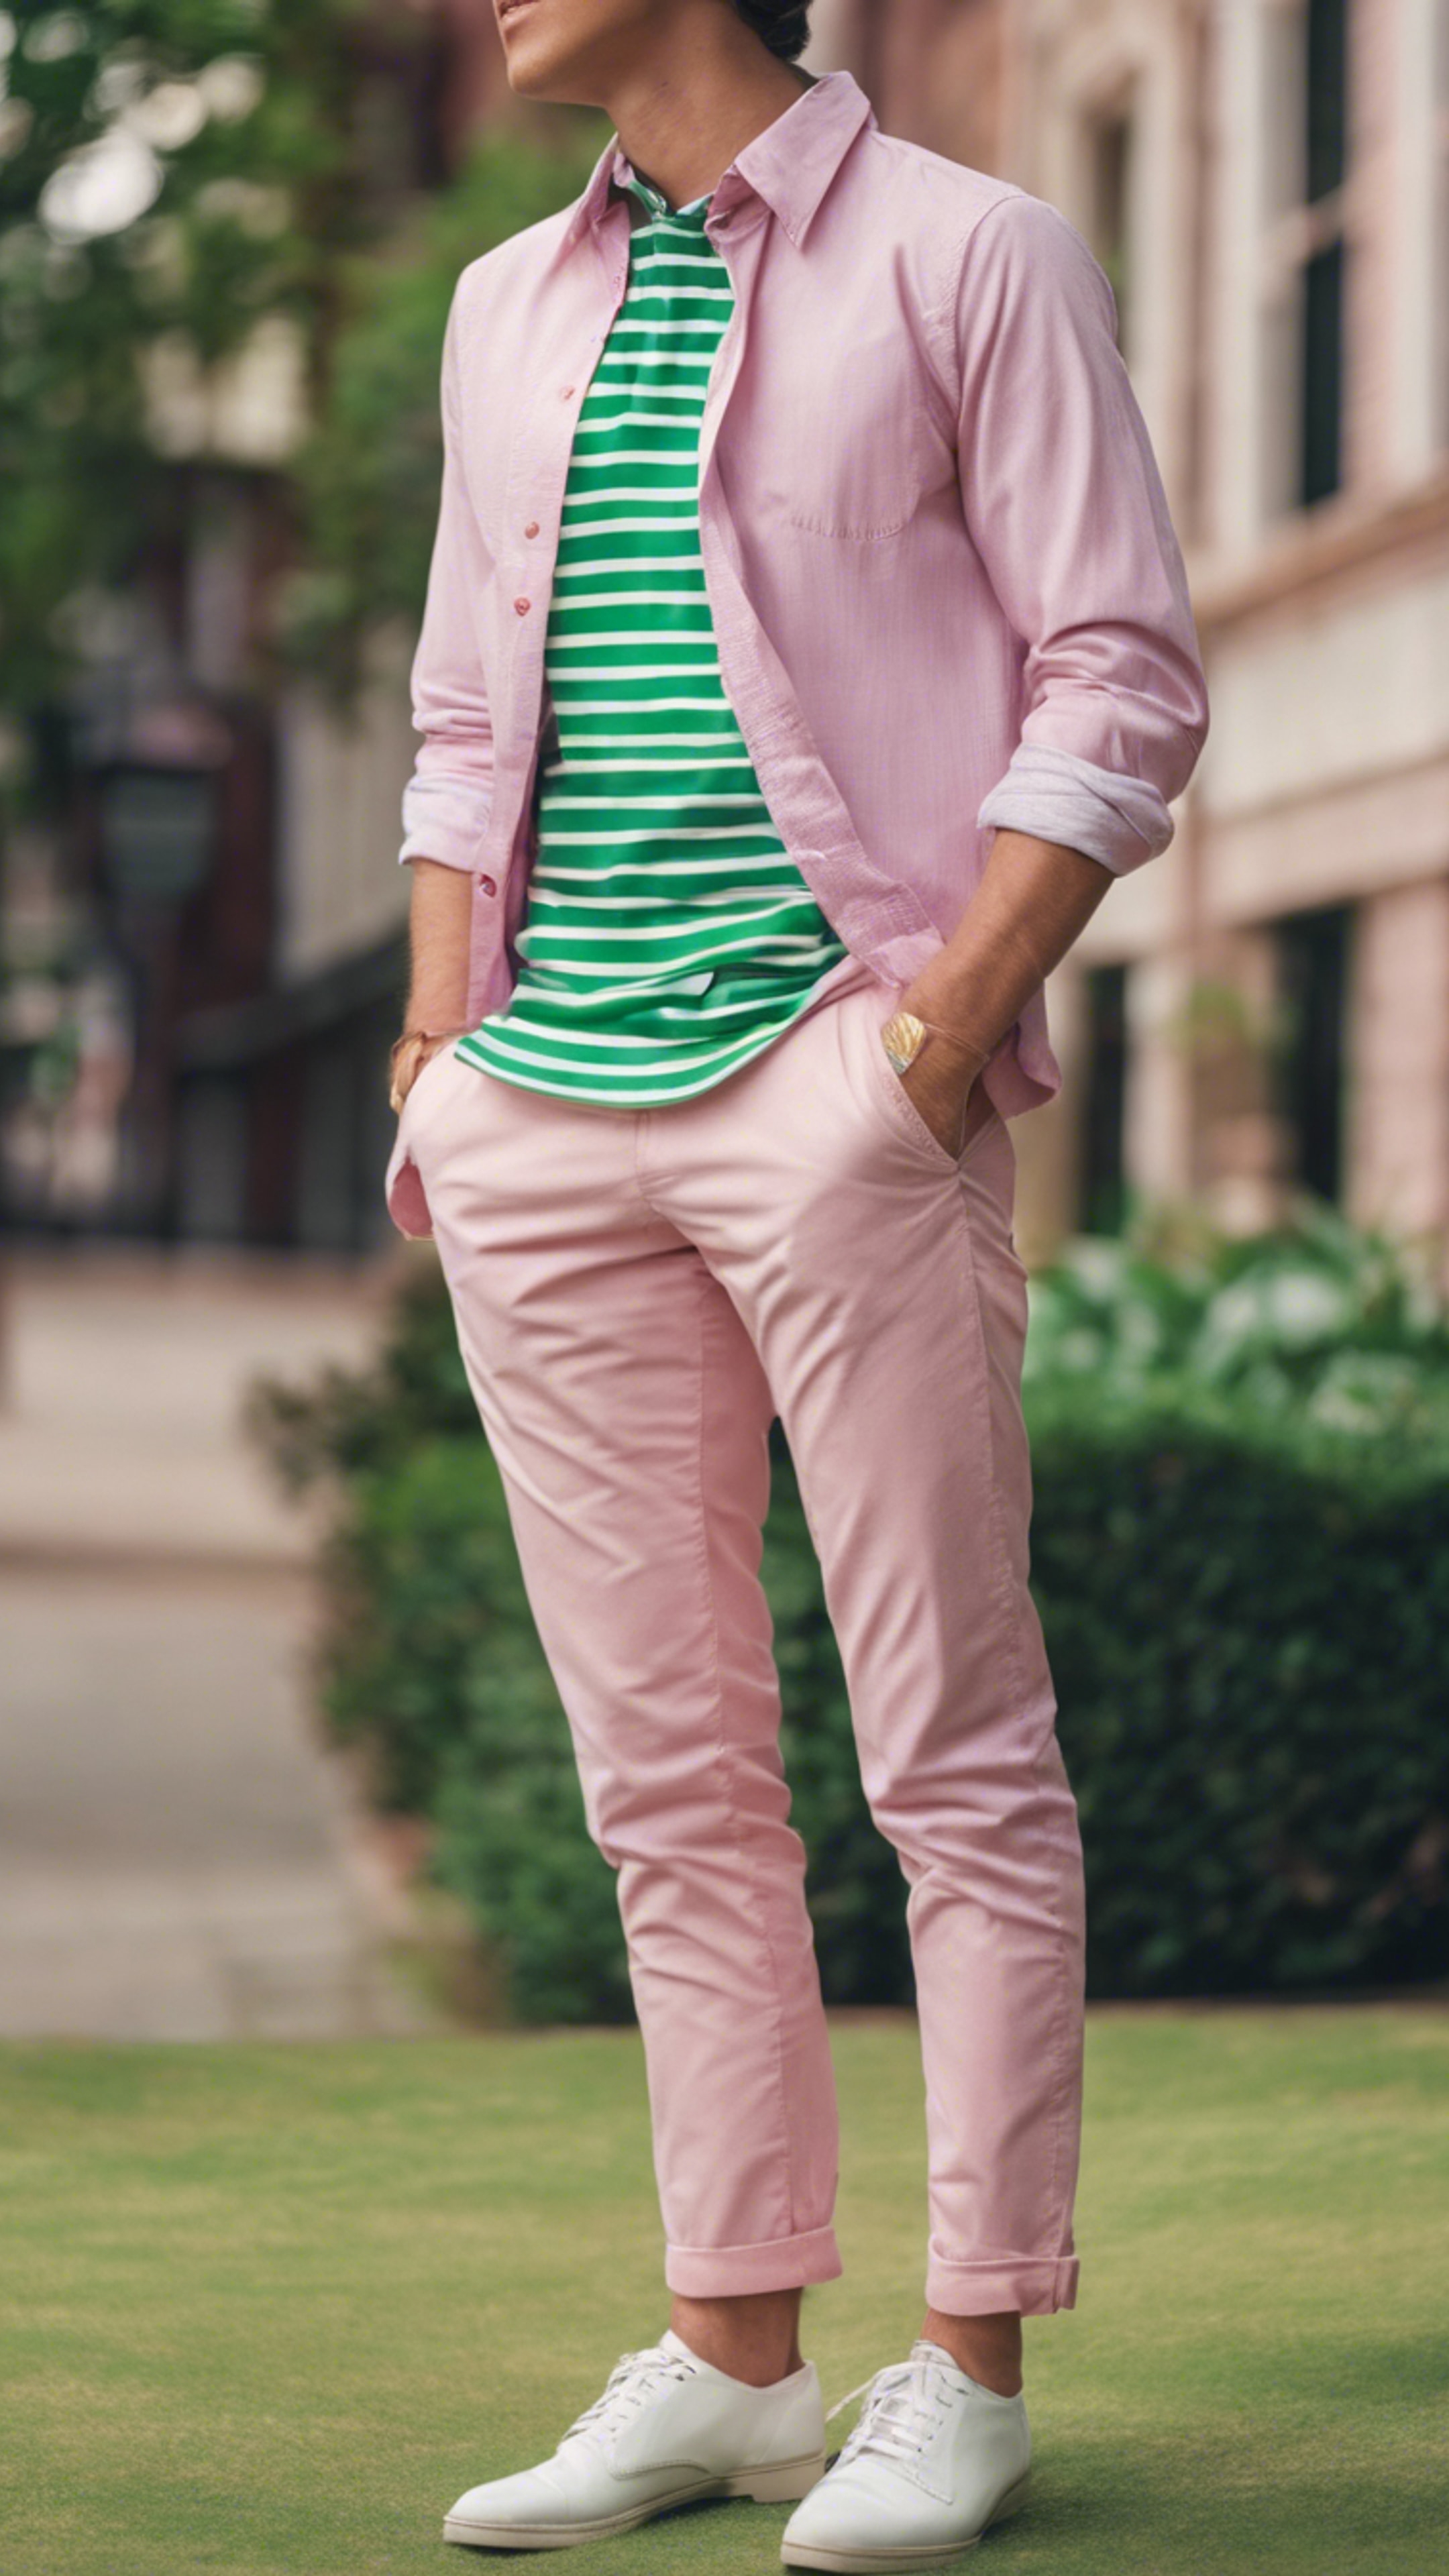 A classic preppy outfit in pink chinos with a green striped Oxford shirt. Taustakuva[7b2809c9502f40299443]